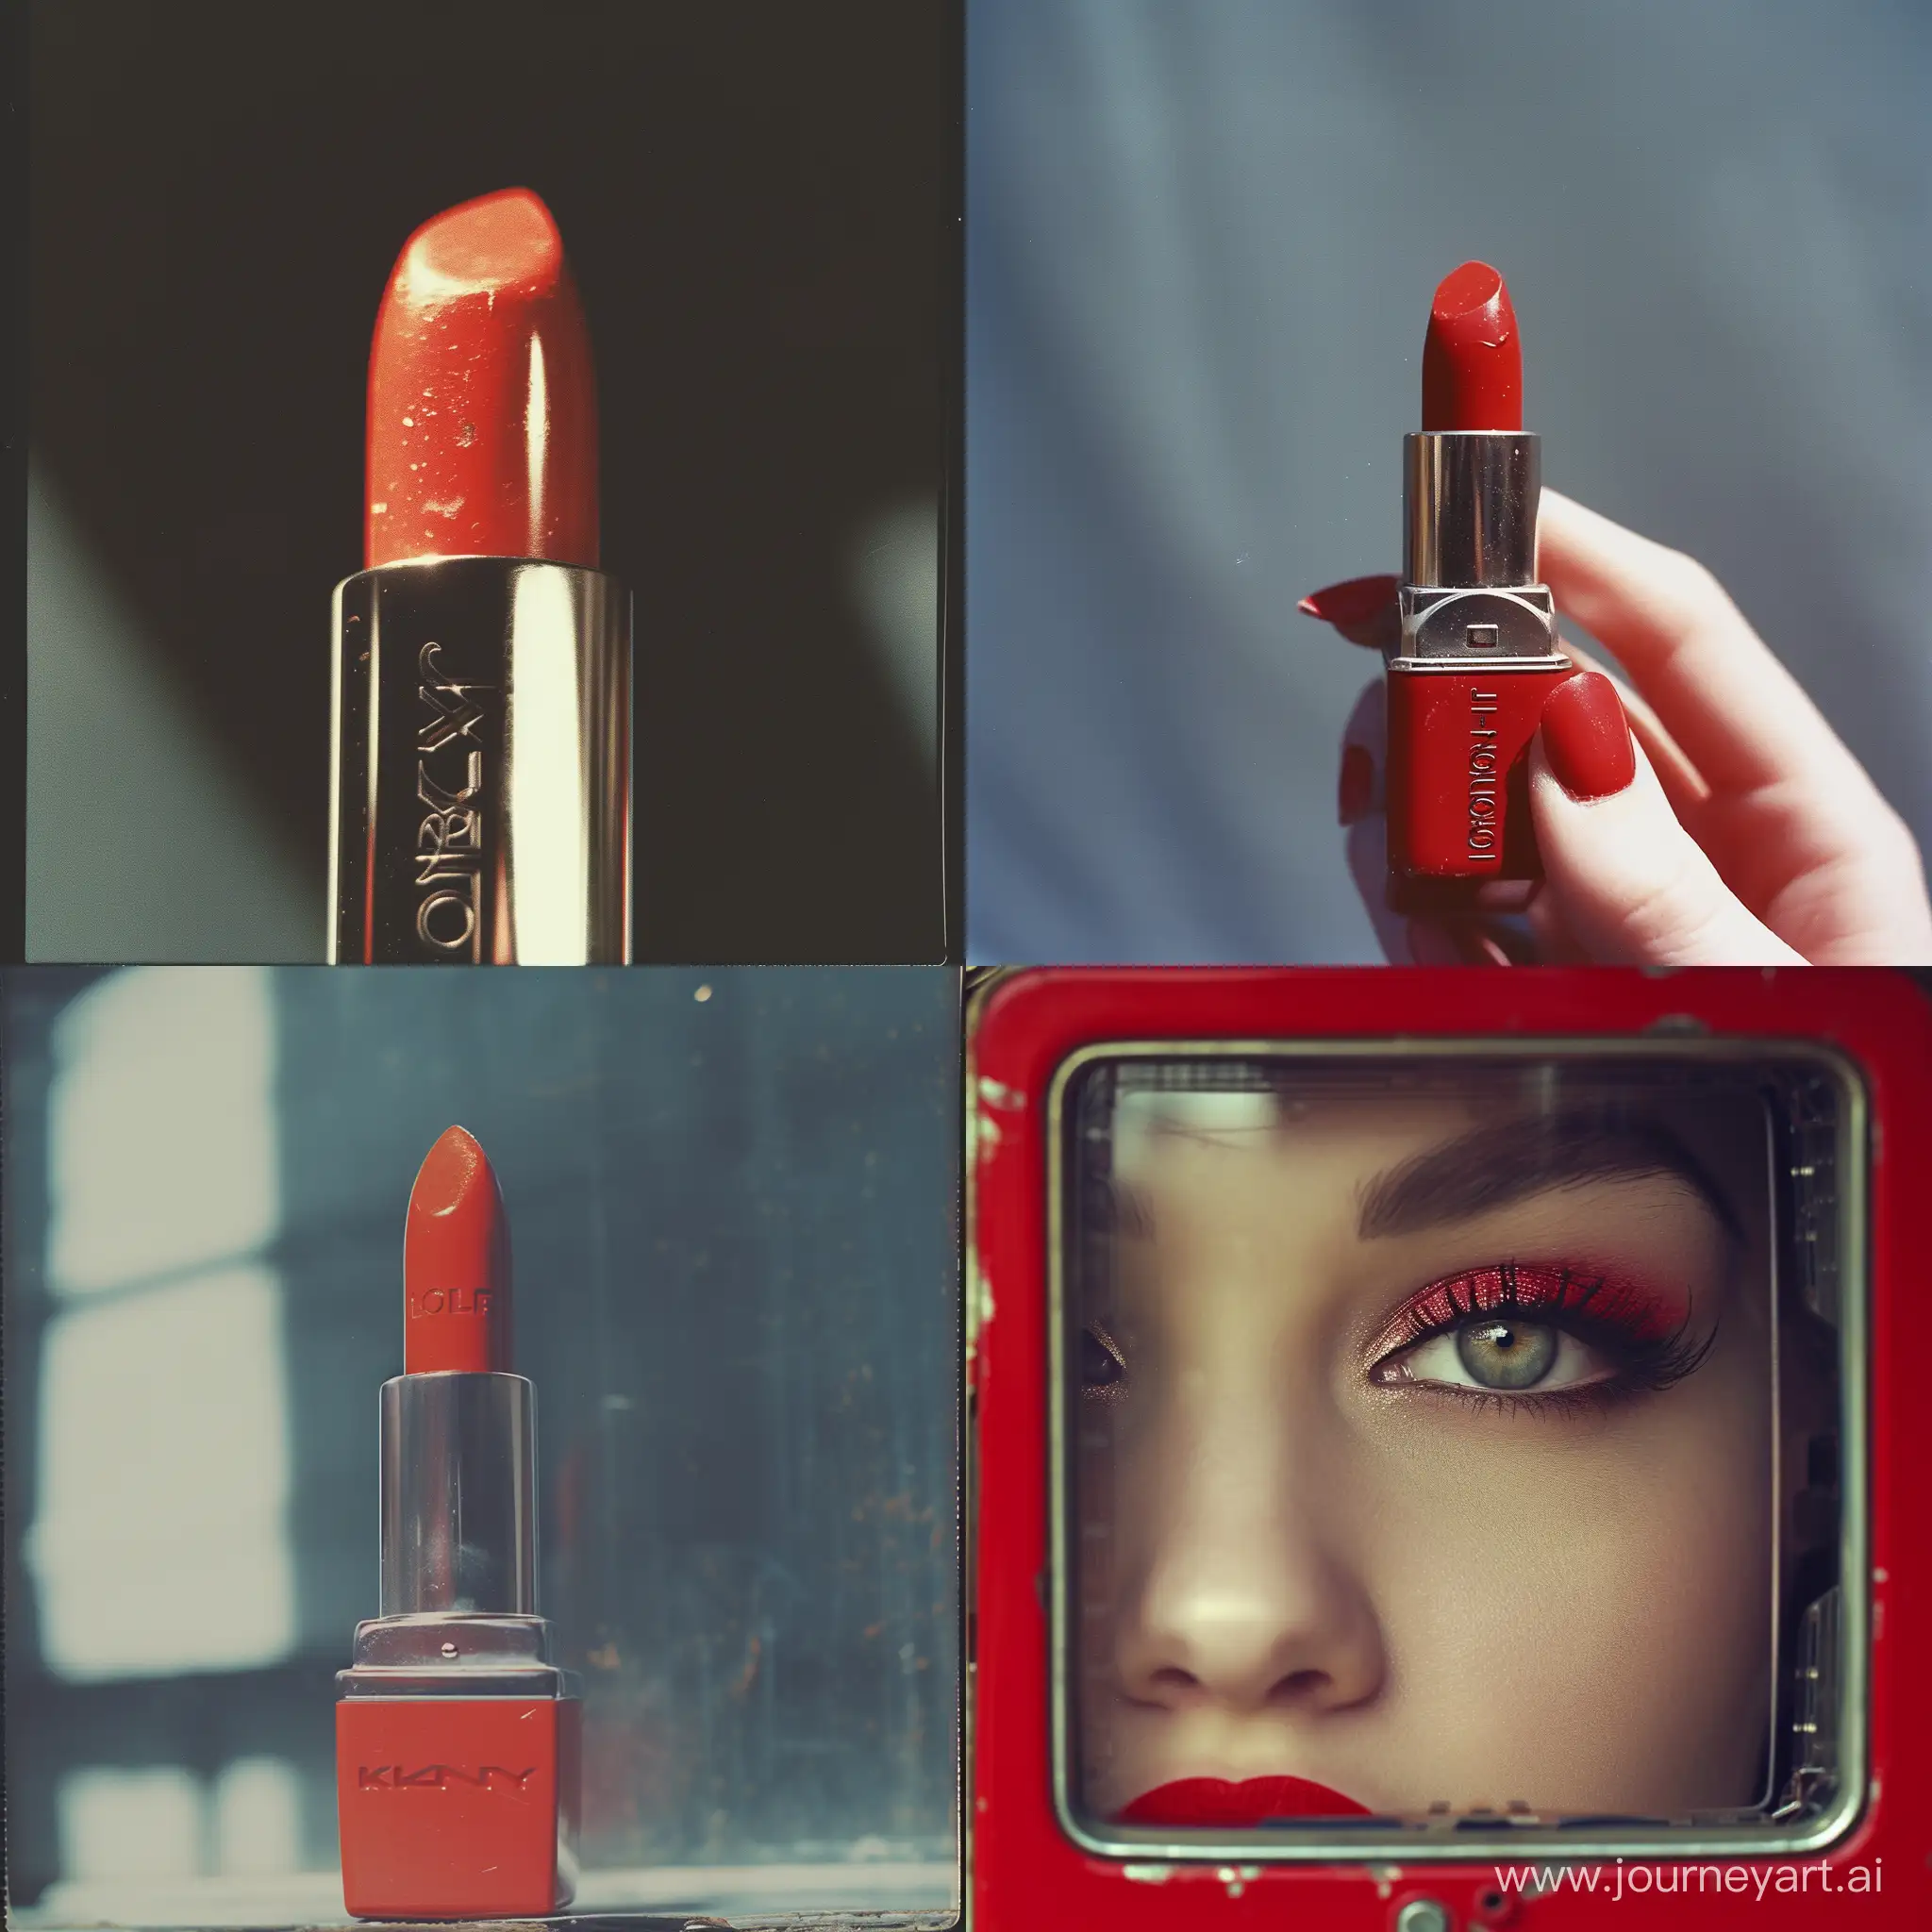 Bold-Oyster-Women-with-Red-Lipstick-Captivating-Kodak-Moment